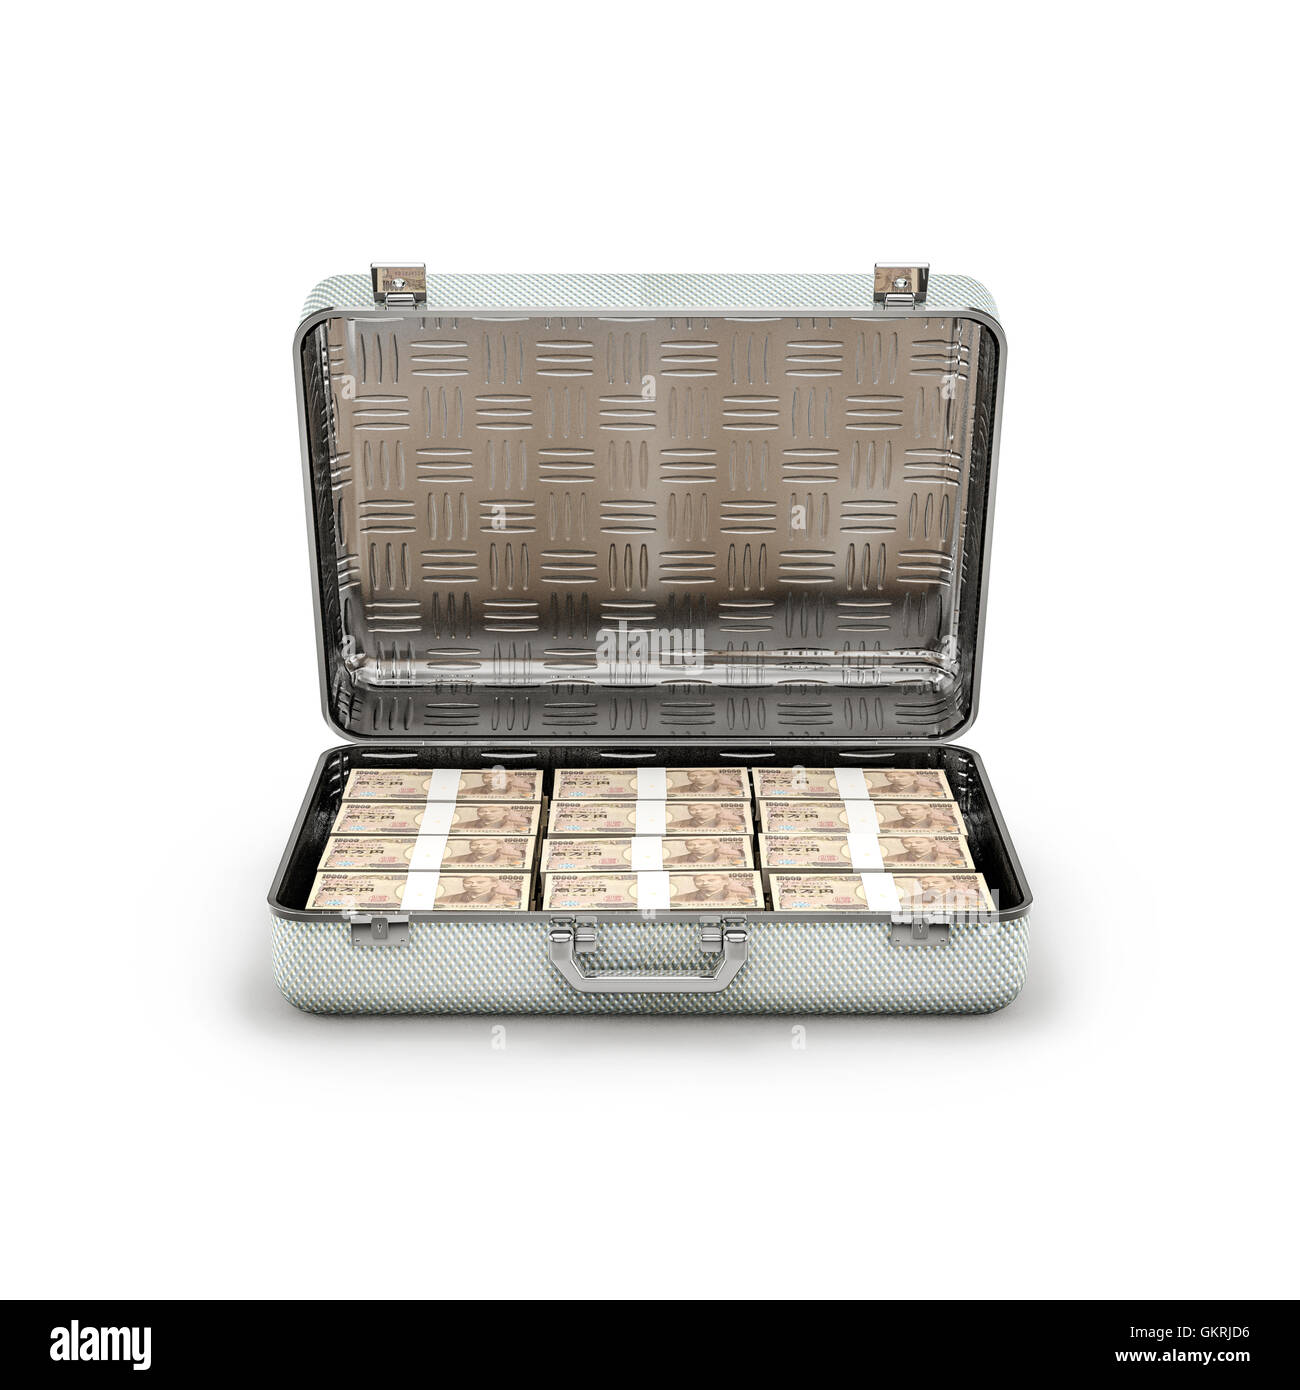 Briefcase ransom yen / 3D illustration of stacks of ten thousand yen notes inside metal briefcase Stock Photo